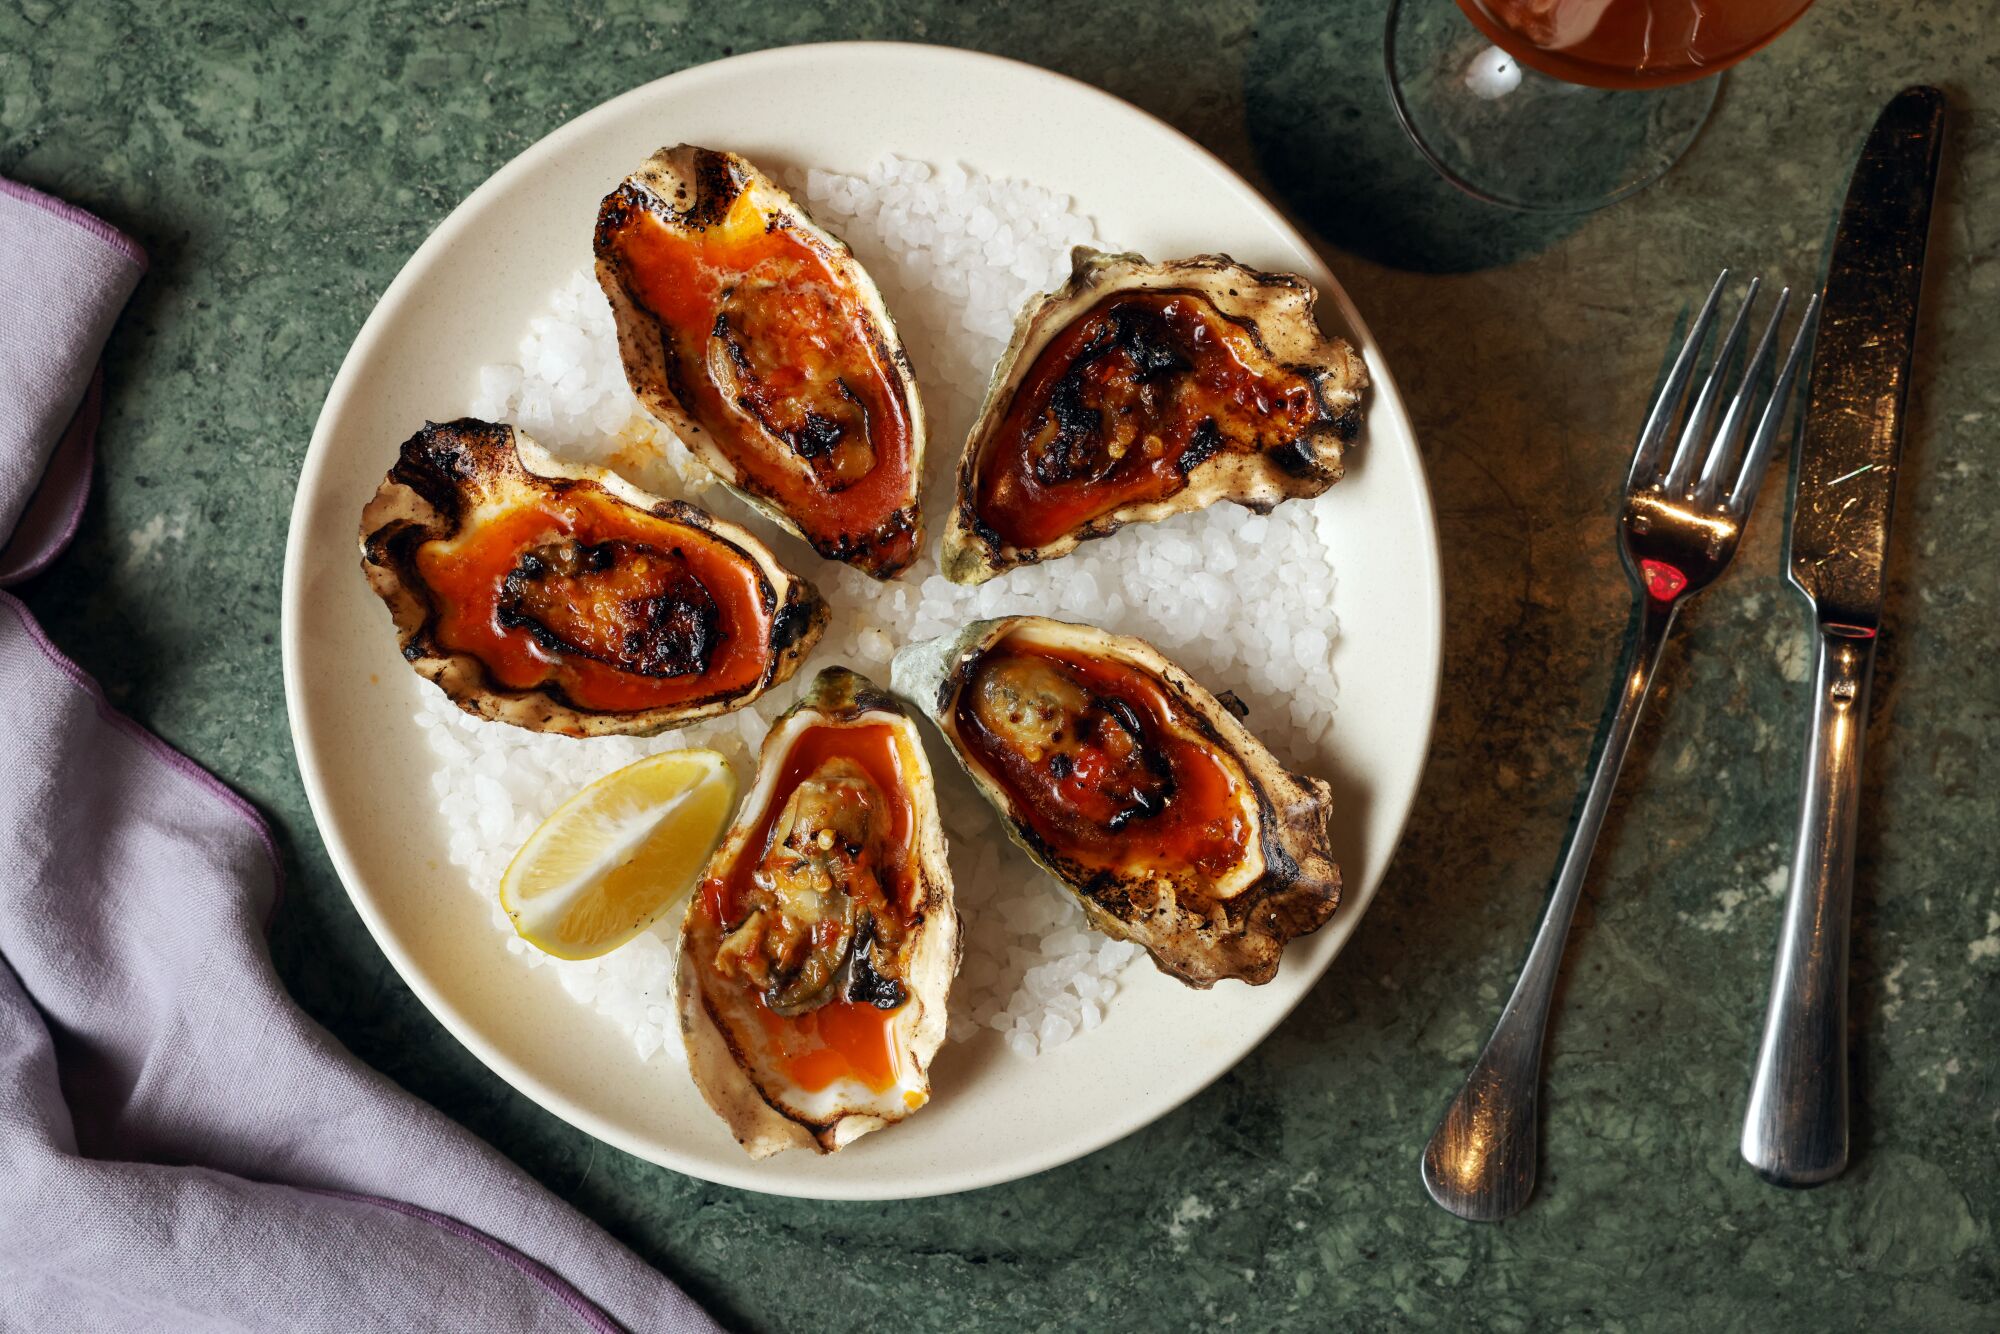 The Broiled oysters in fermented chili butter is photographed at Rory's Place, a new restaurant on May 6, 2022 at Ojai, CA.